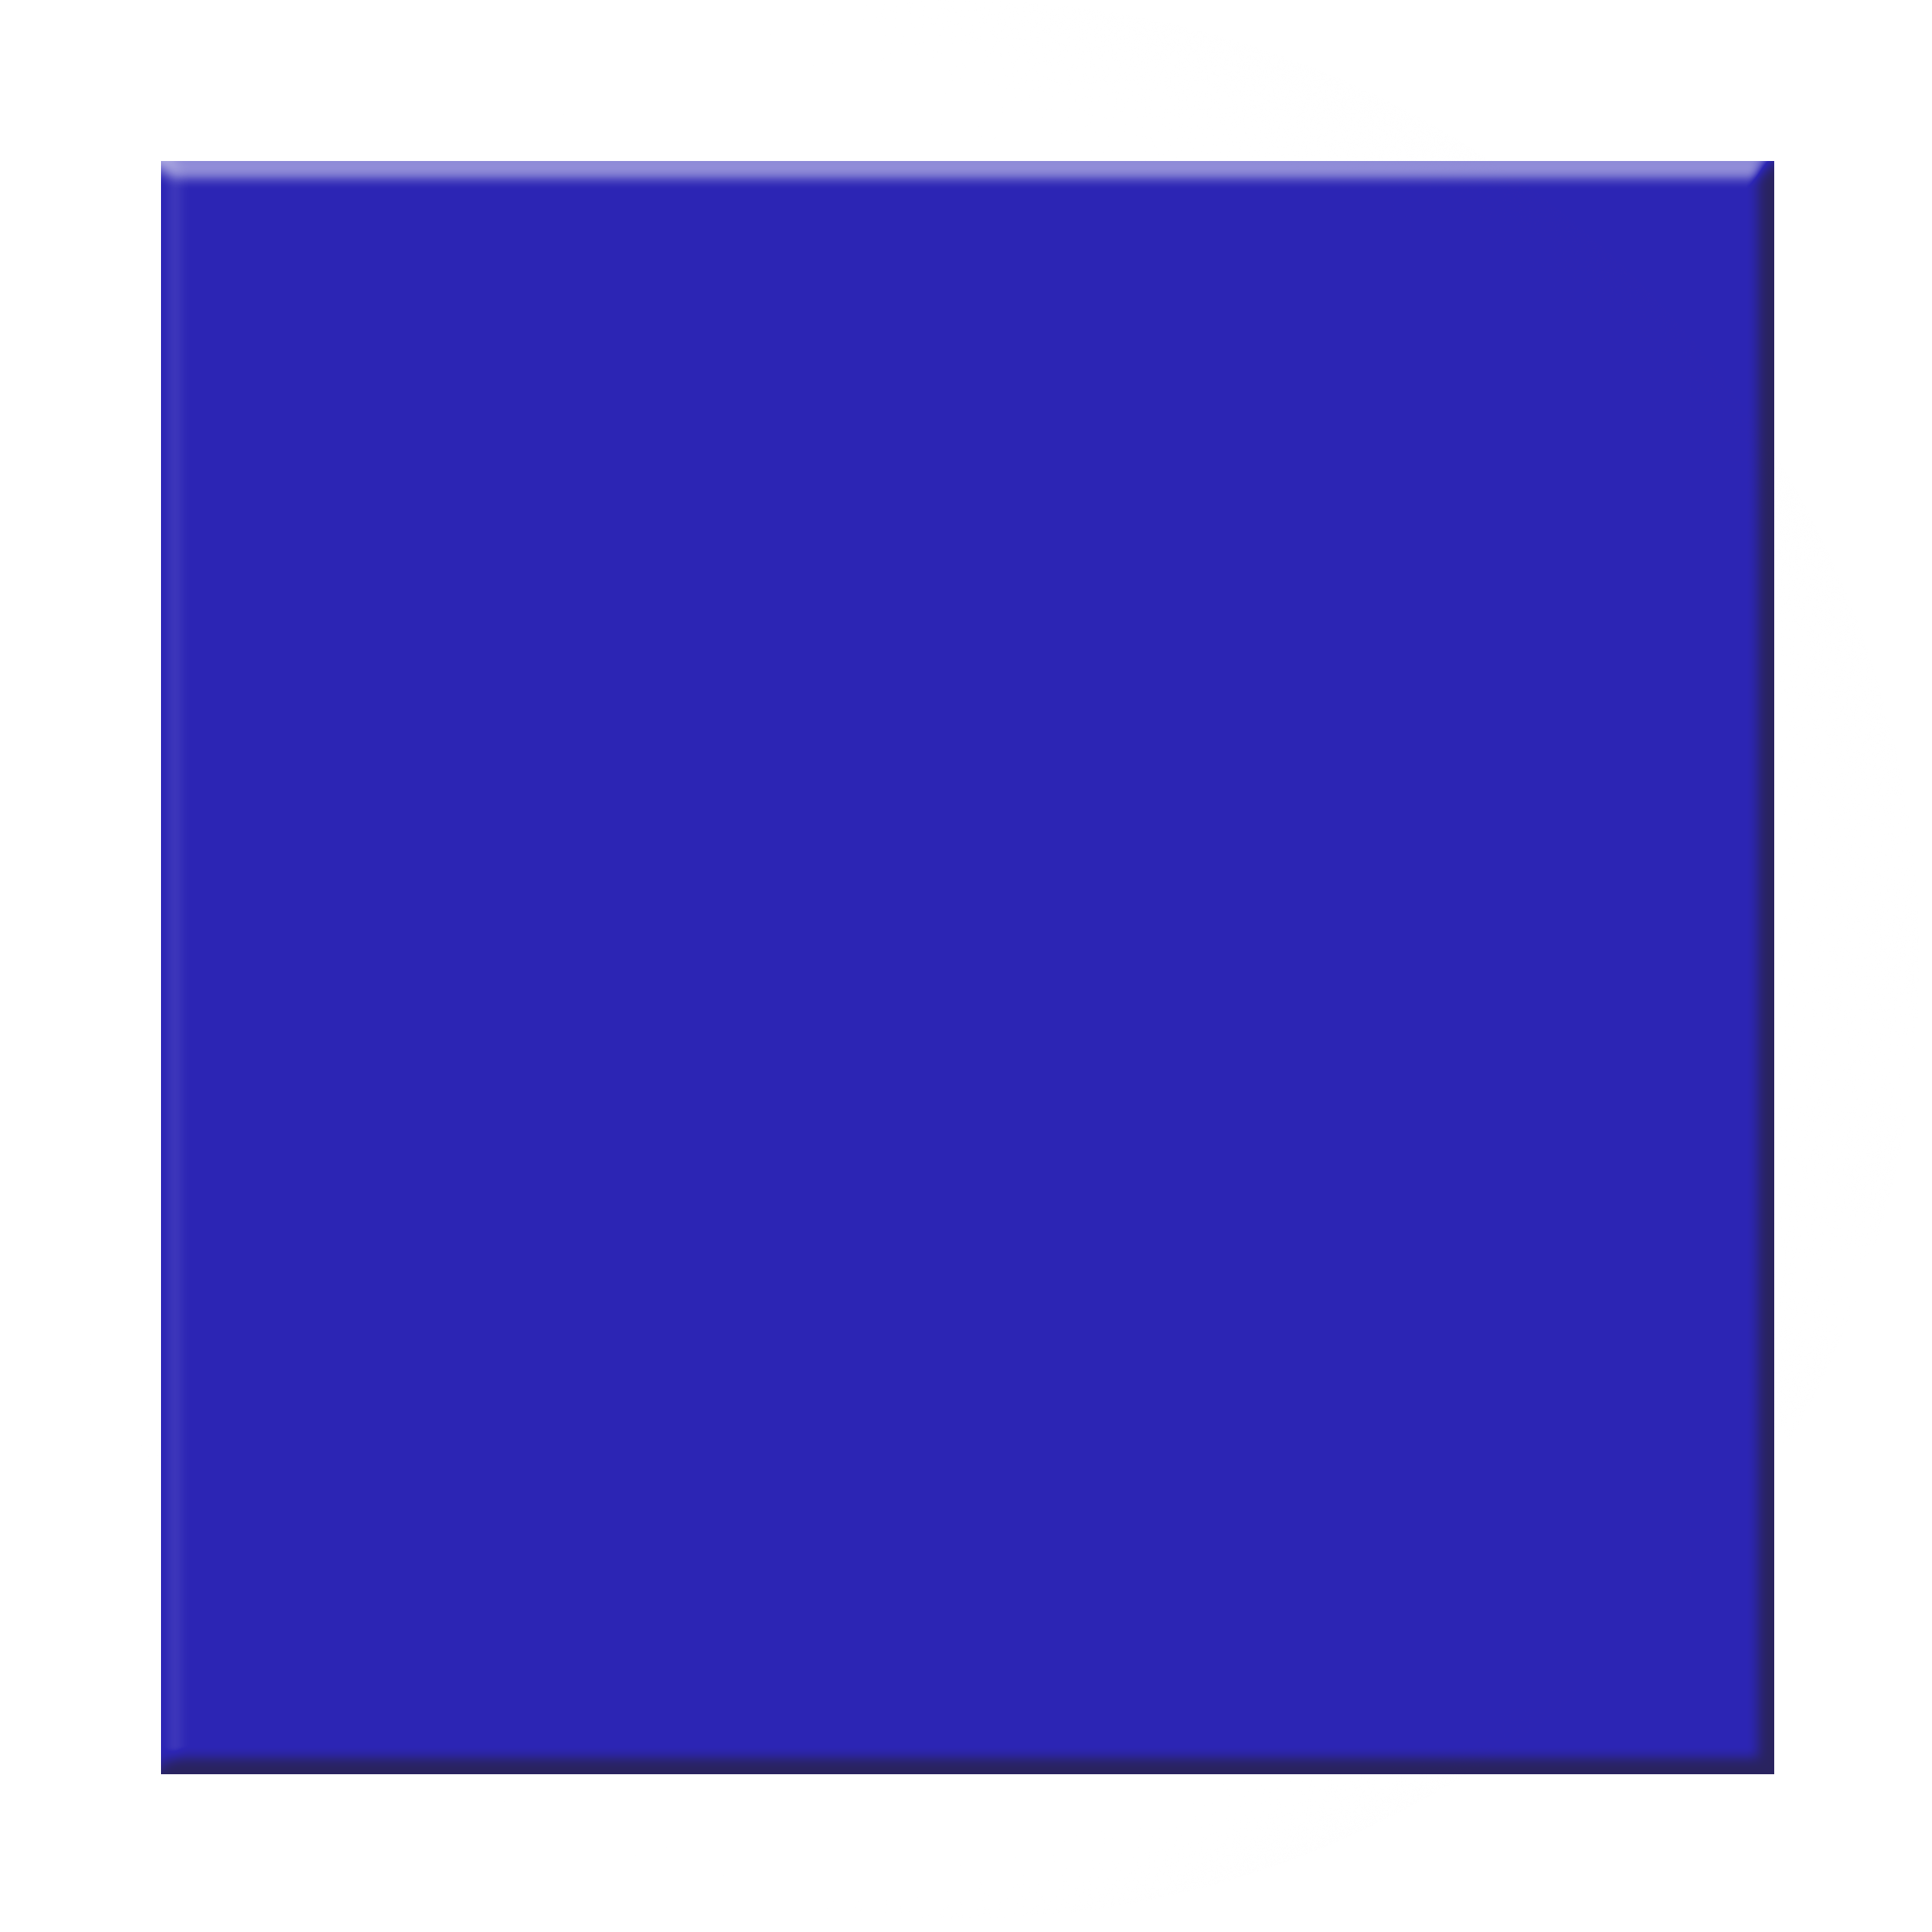 Blue Square Free Images At Clker Com Vector Clip Art Online Royalty Free Public Domain